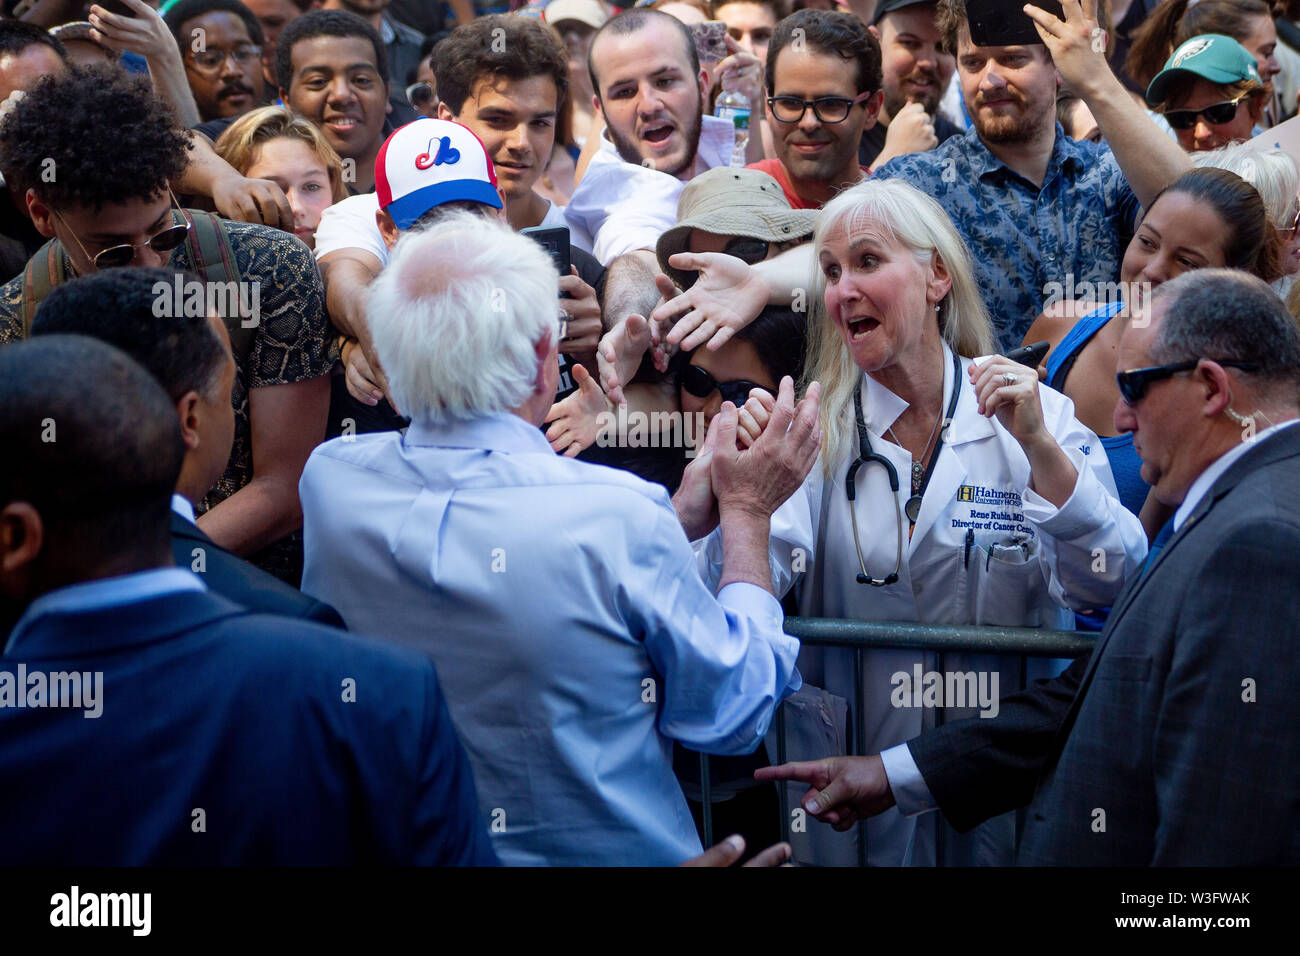 Philadelphia, Pennsylvania, USA. 15th July, 2019. Senator Bernie Sanders greets the crowd following a protest against the closure of Hahnemann University Hospital in Philadelphia, PA, July 15, 2019. Hahnemann, a busy urban healthcare center, is facing imminent closure after being acquired by a hedge fund that is looking to raze the building and turn the land into rental or retail properties. 15th July, 2019. Credit: Michael Candelori/ZUMA Wire/Alamy Live News Credit: ZUMA Press, Inc./Alamy Live News Stock Photo